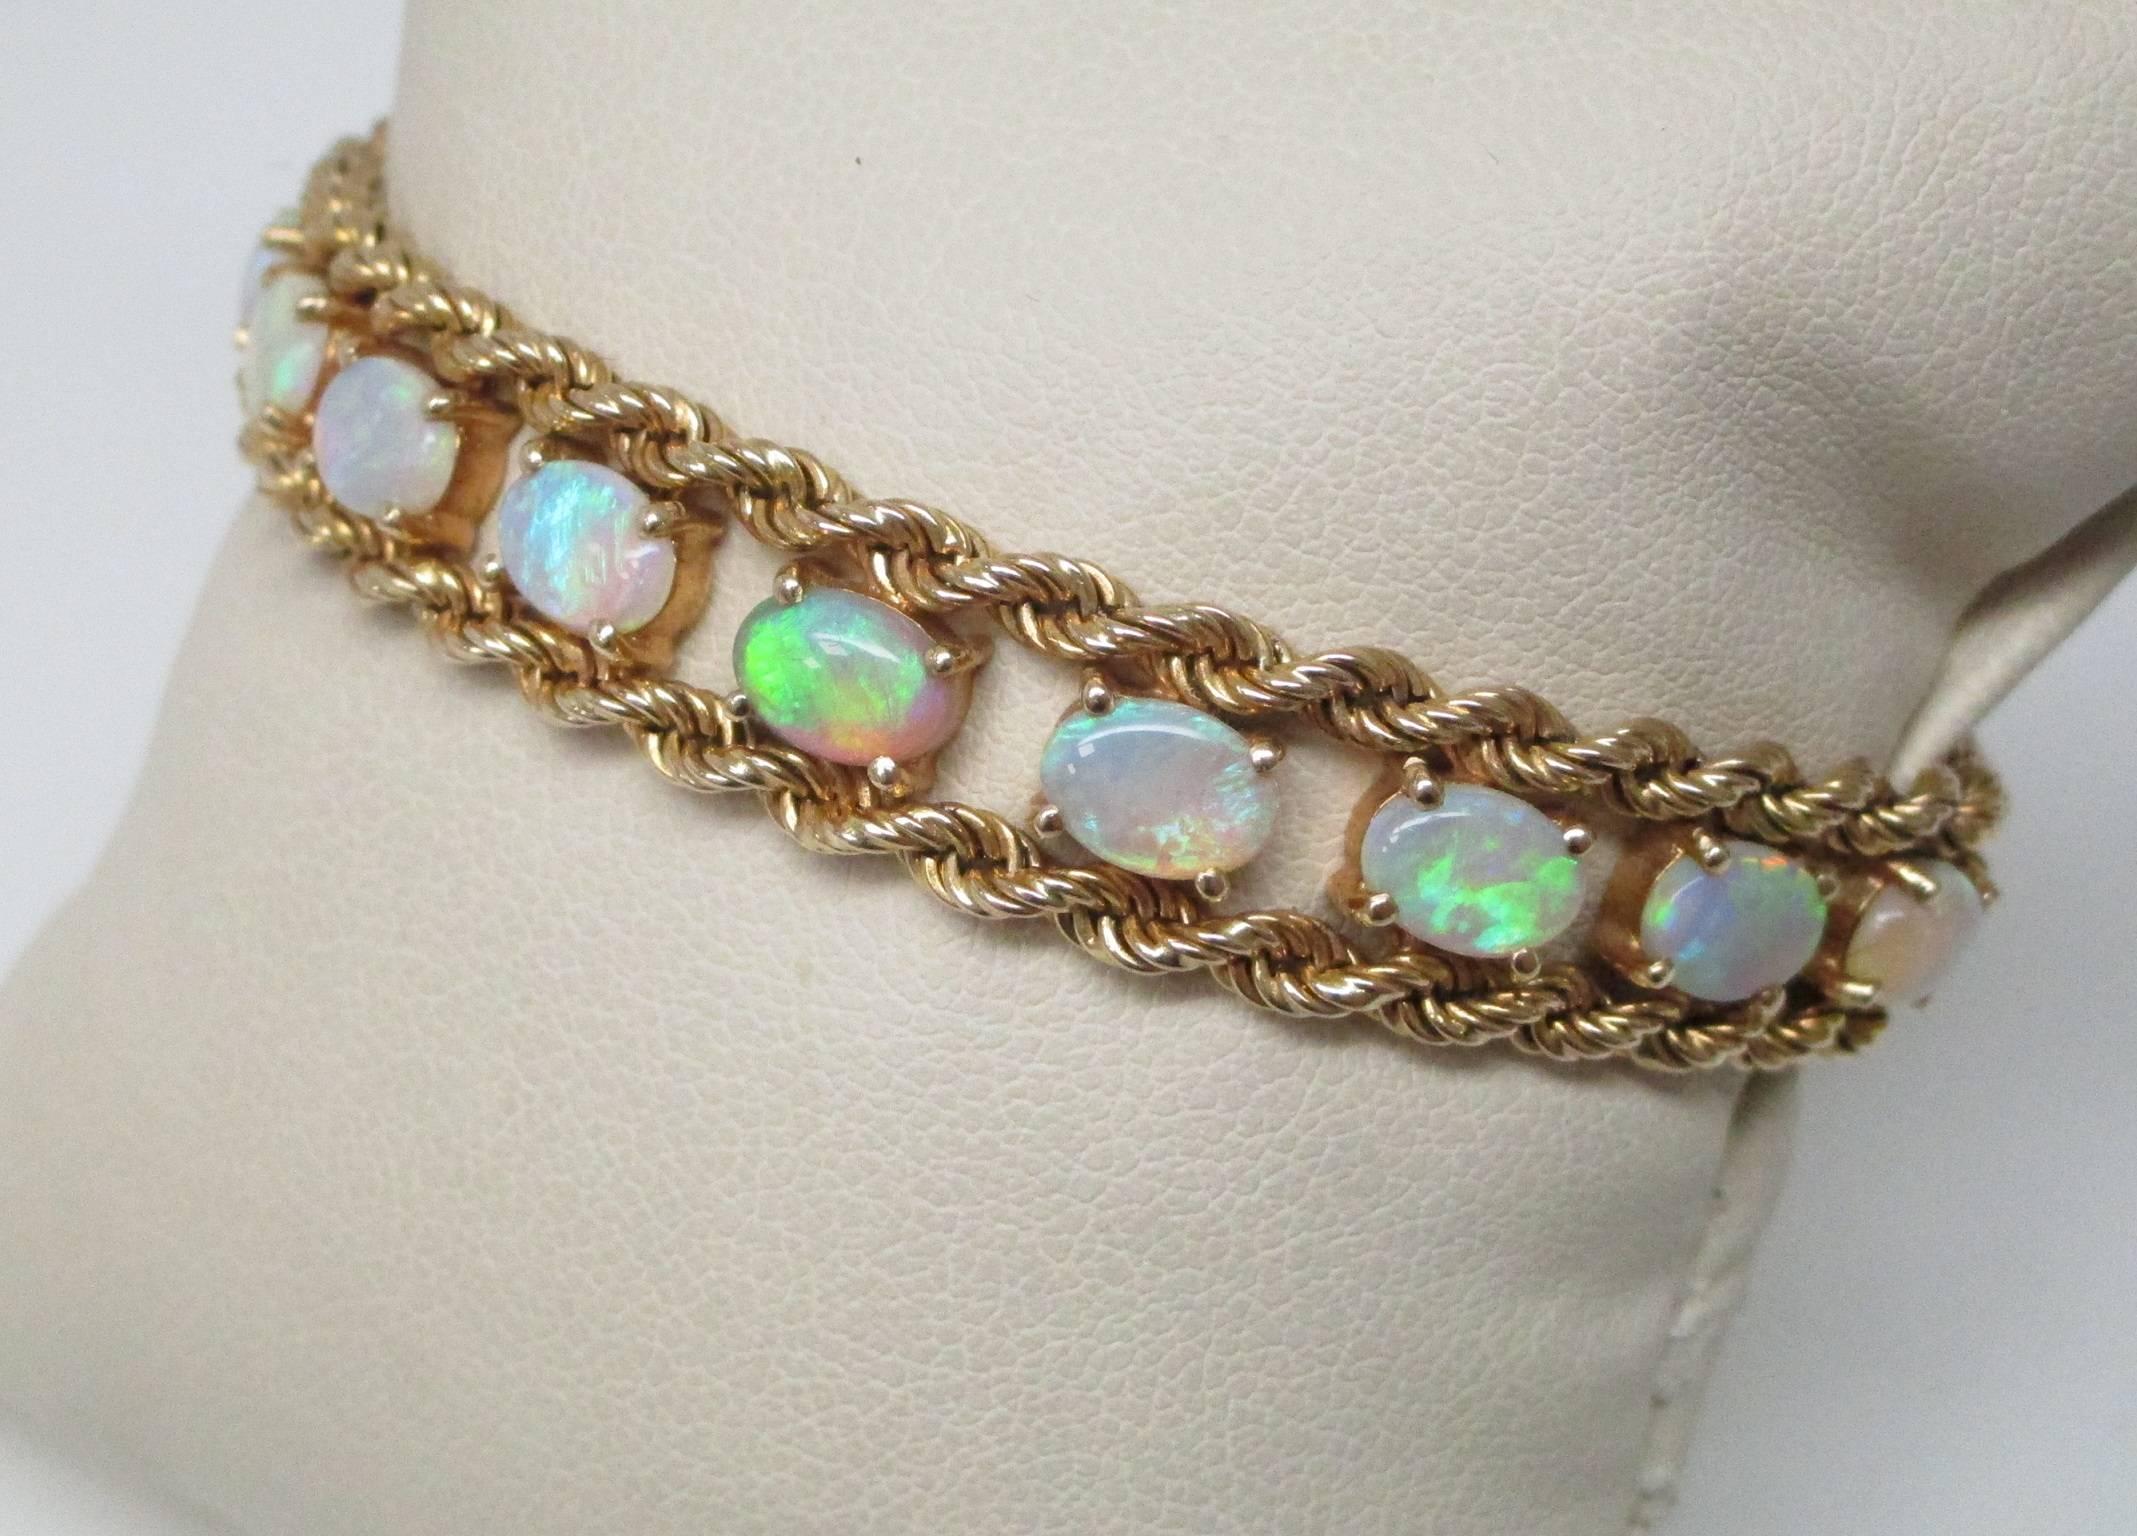 Photos never show just how beautiful opals are. This bracelet has 15+ carats of opal cabochons cradled by 14K yellow gold. The bracelet has a wonderful drape and is a joy to wear. There will be so many people who stop you to admire this stunning